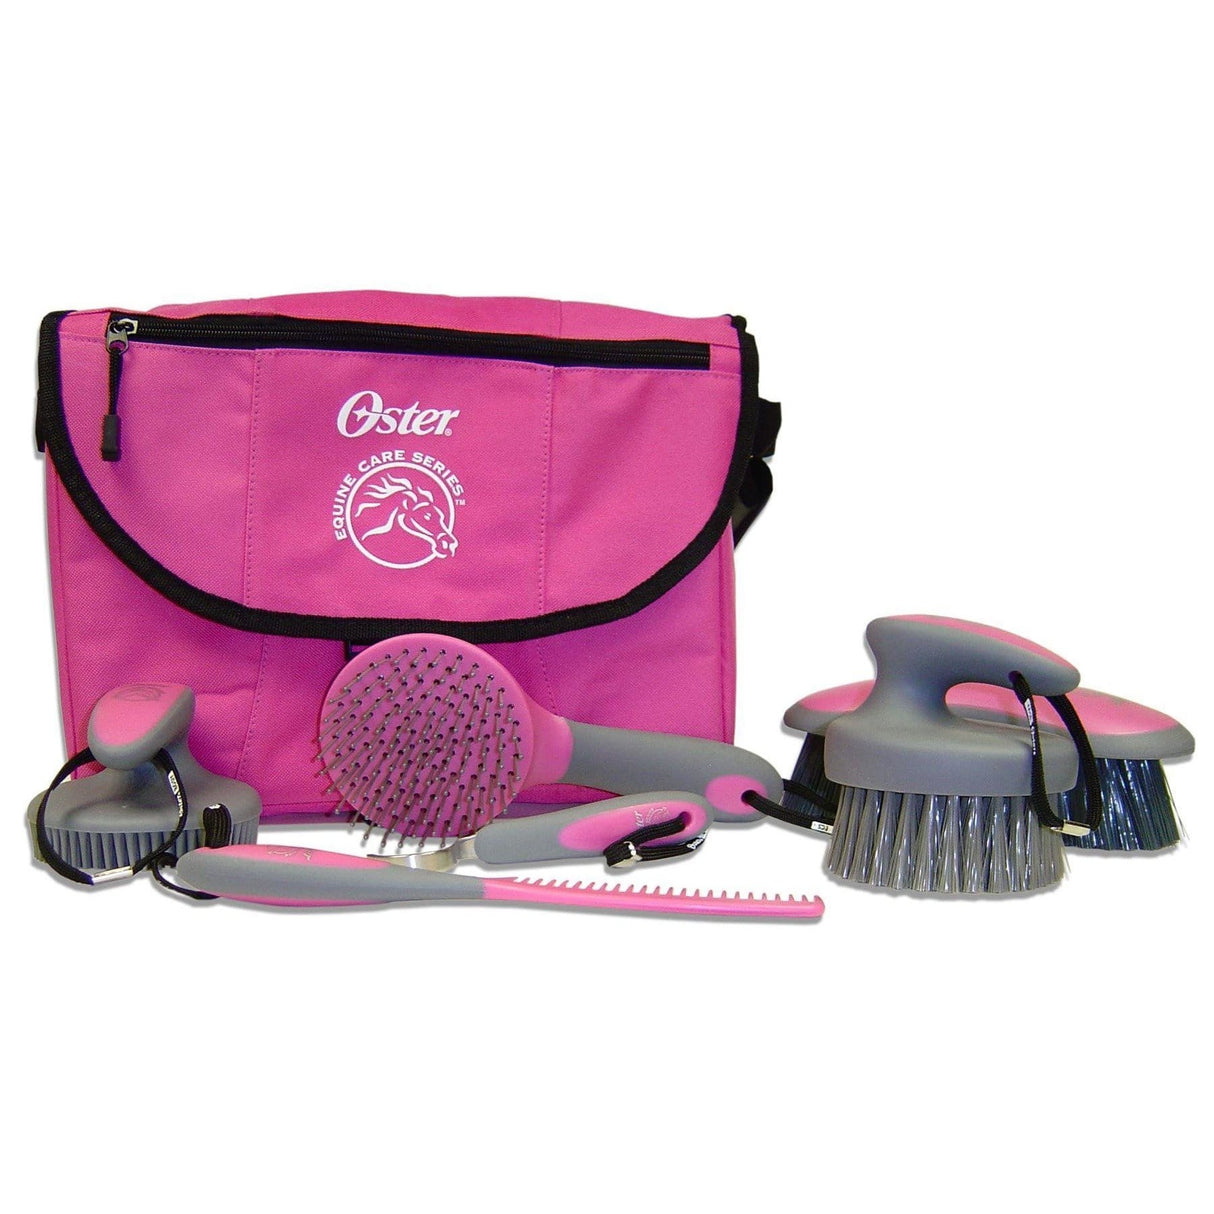 OSTER Seven Piece Grooming Kit 270B